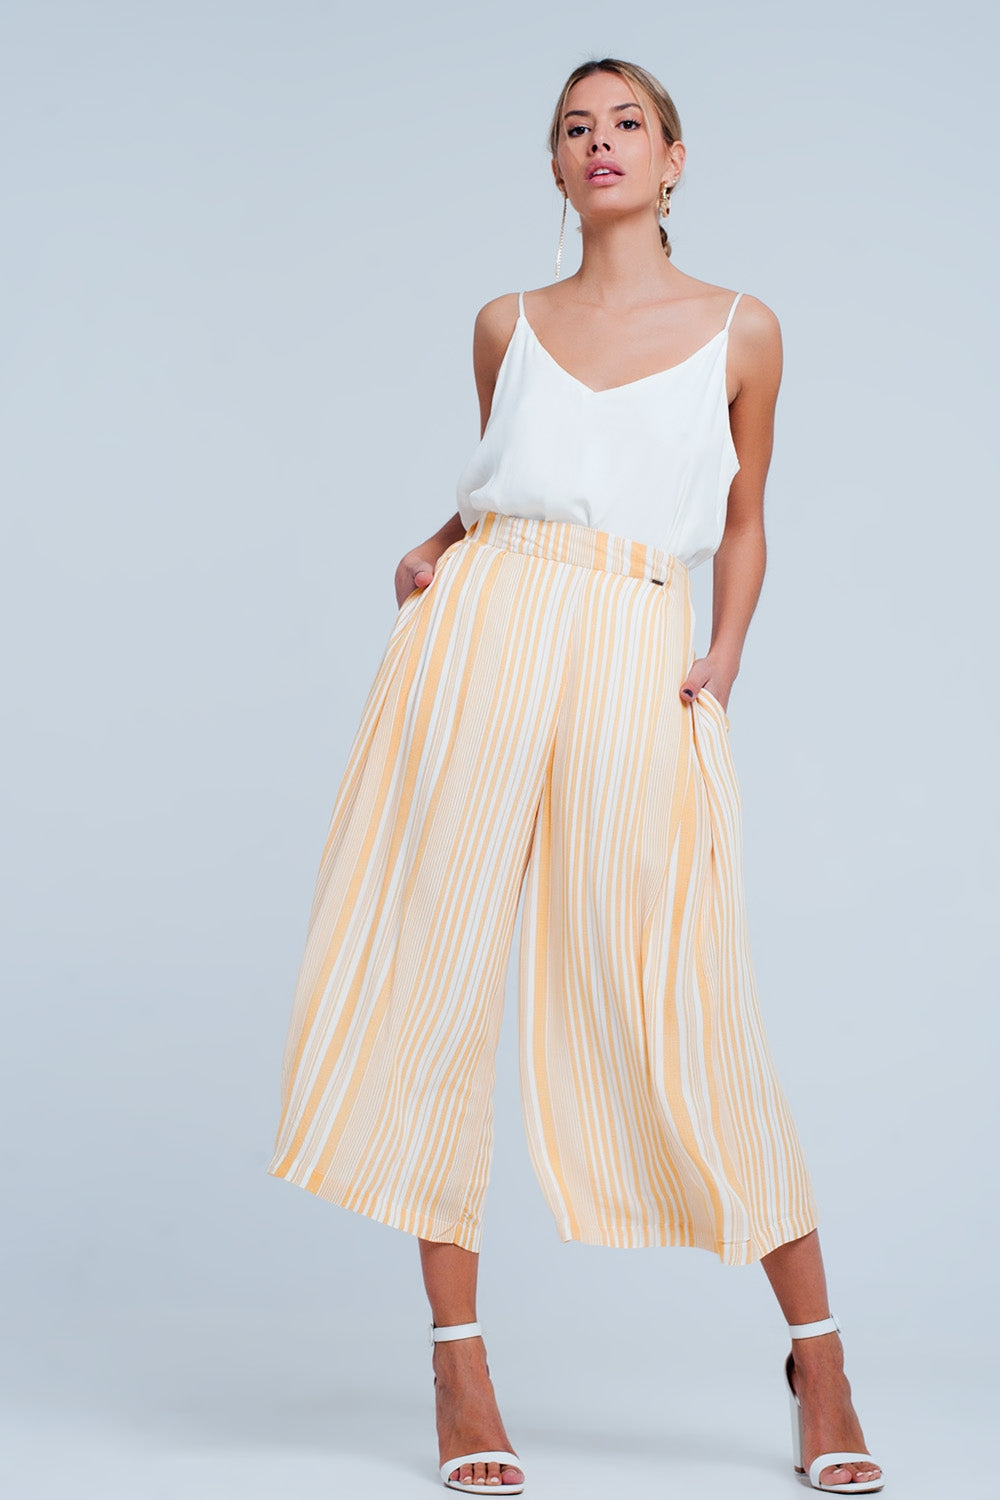 Q2-Culottes in yellow stripe-Pants